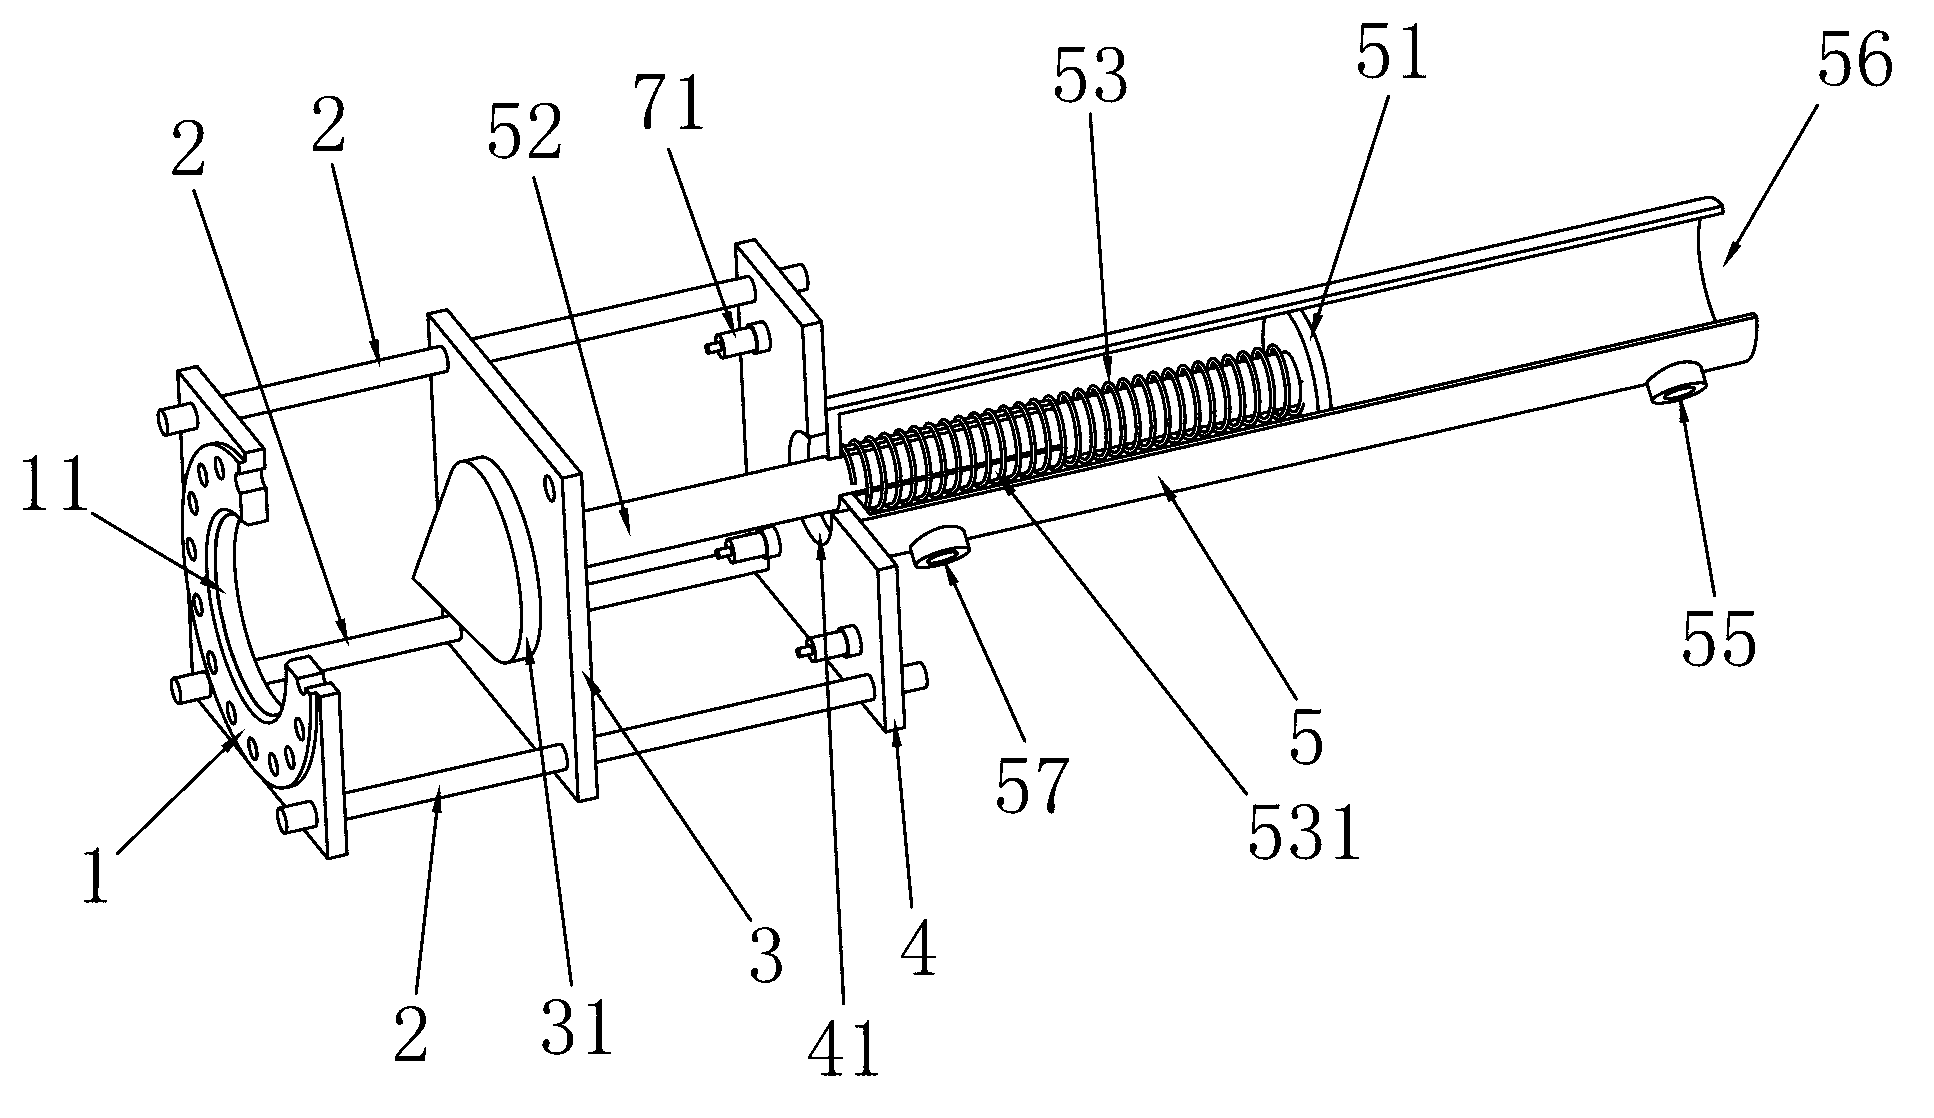 Quick-opening valve for steam explosion device